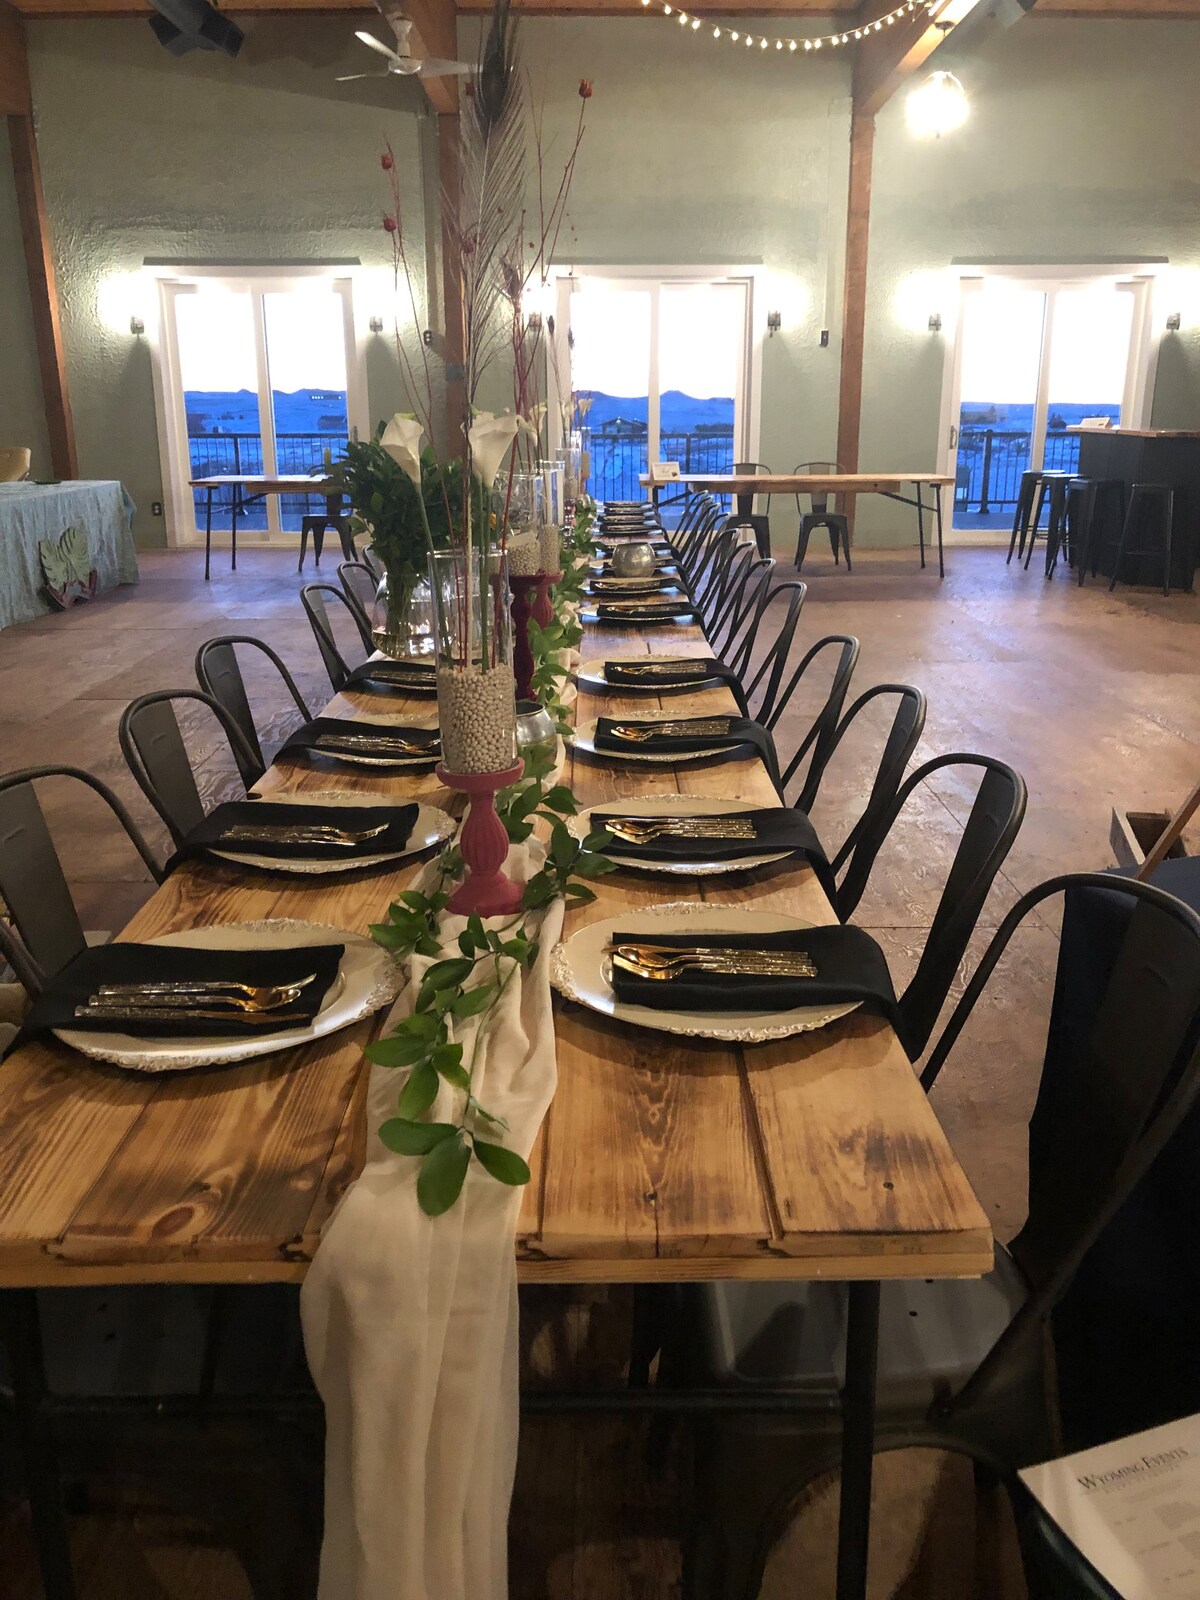 Family Get together: Little venue on the prairie